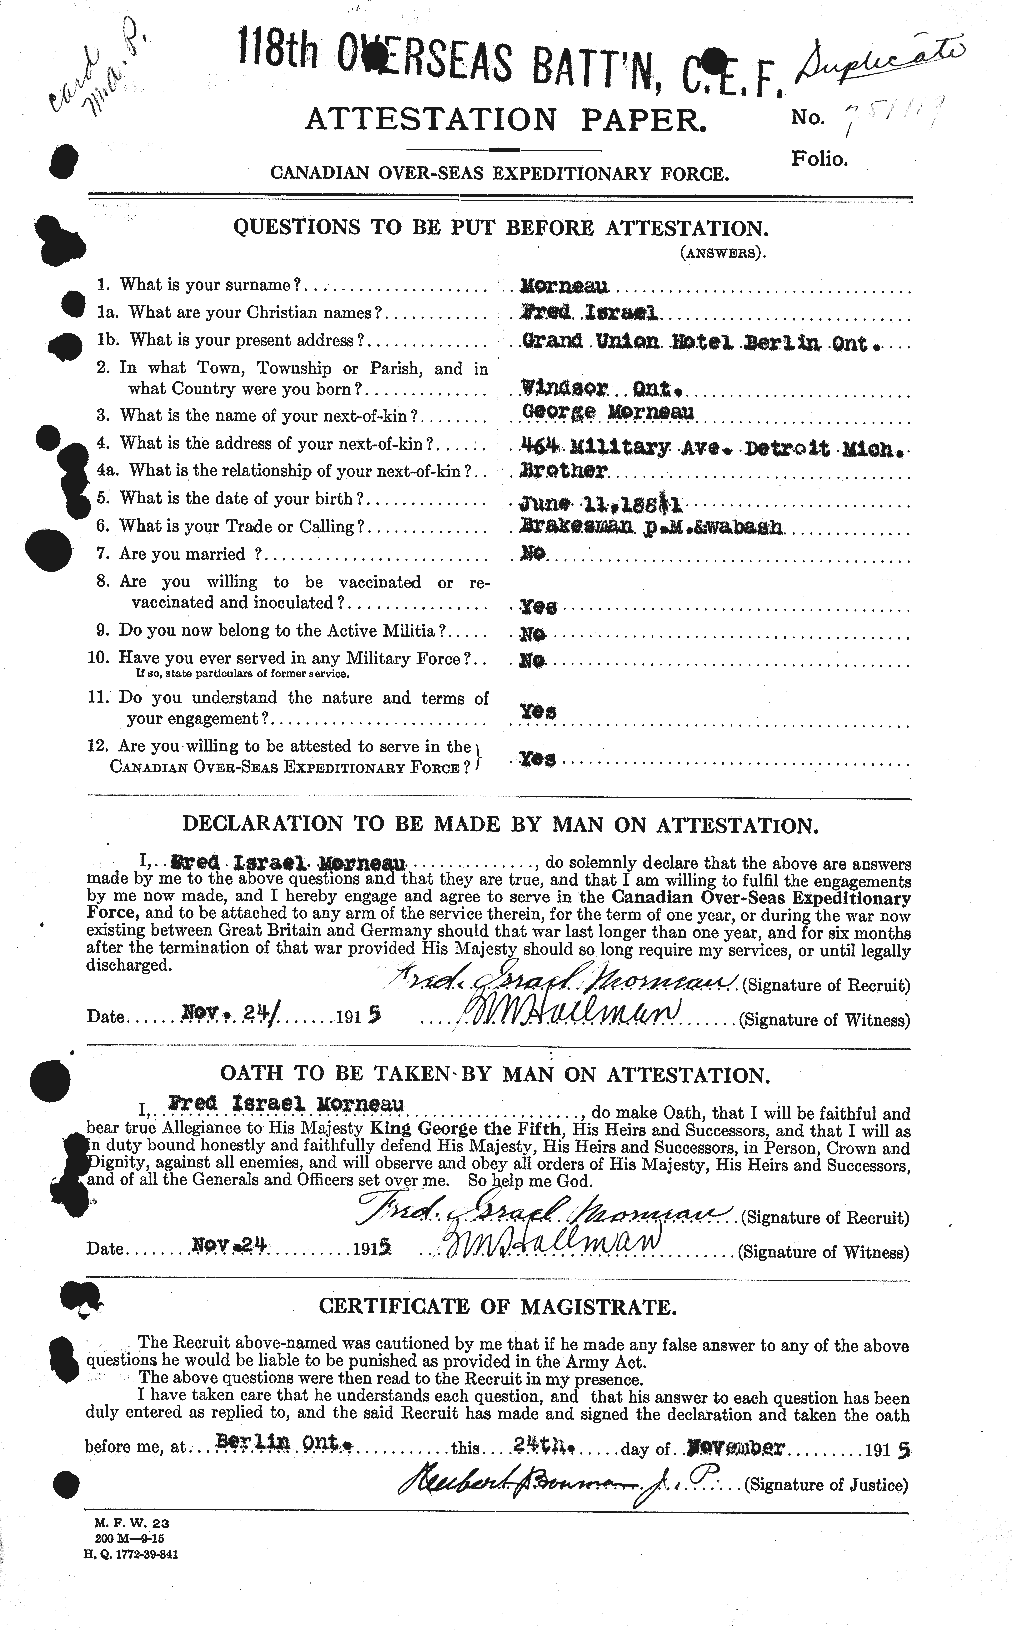 Personnel Records of the First World War - CEF 510756a